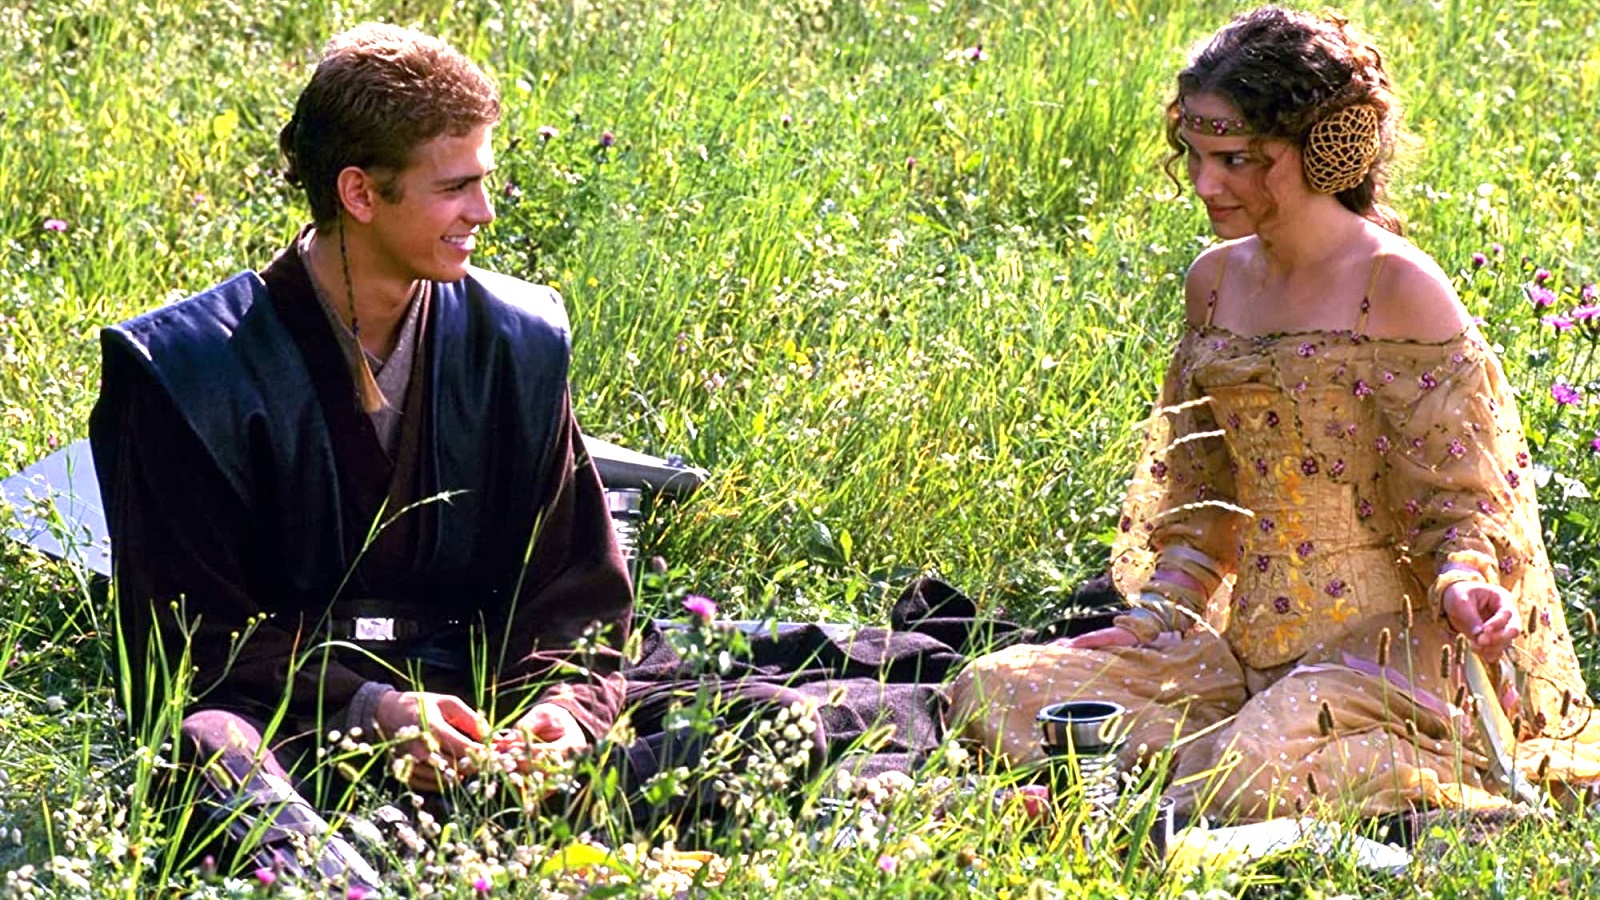 Anakin and Padme in ‘Attack of the Clones’